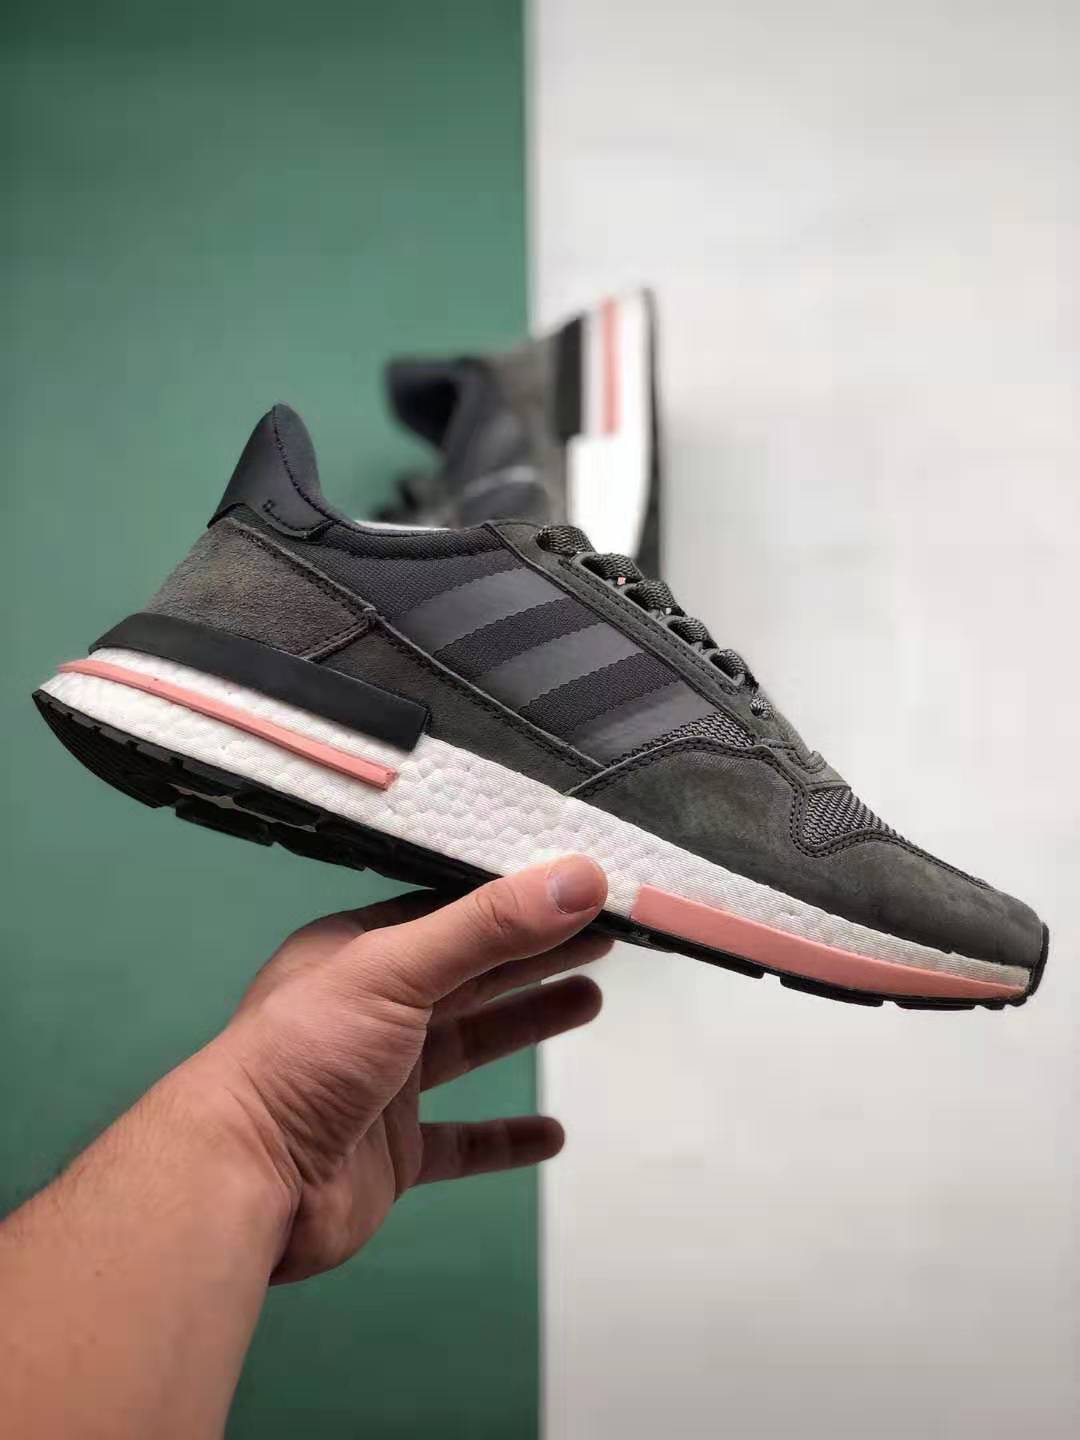 Adidas ZX 500 RM B42217 - High-Performance Sneakers for Ultimate Comfort